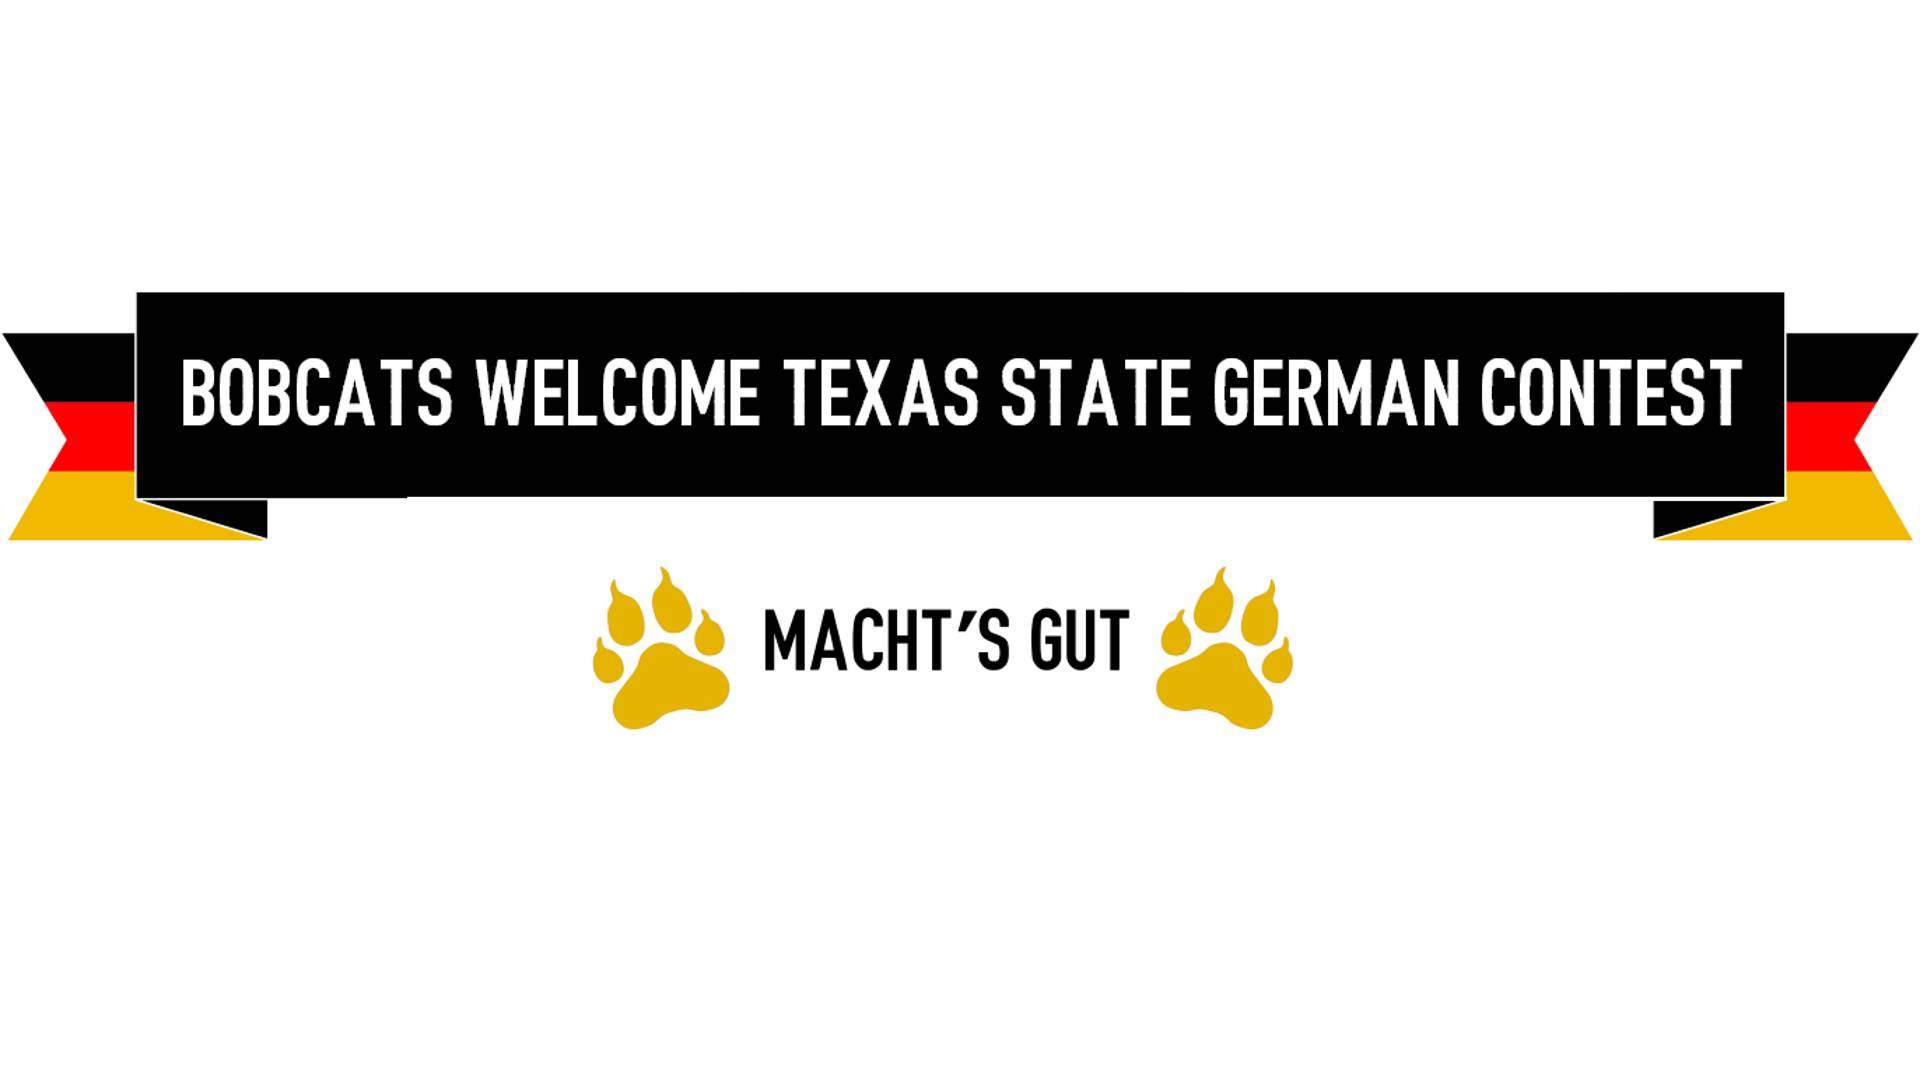 Bobcats Welcome Texas State German Contest - Mach's Gut! 